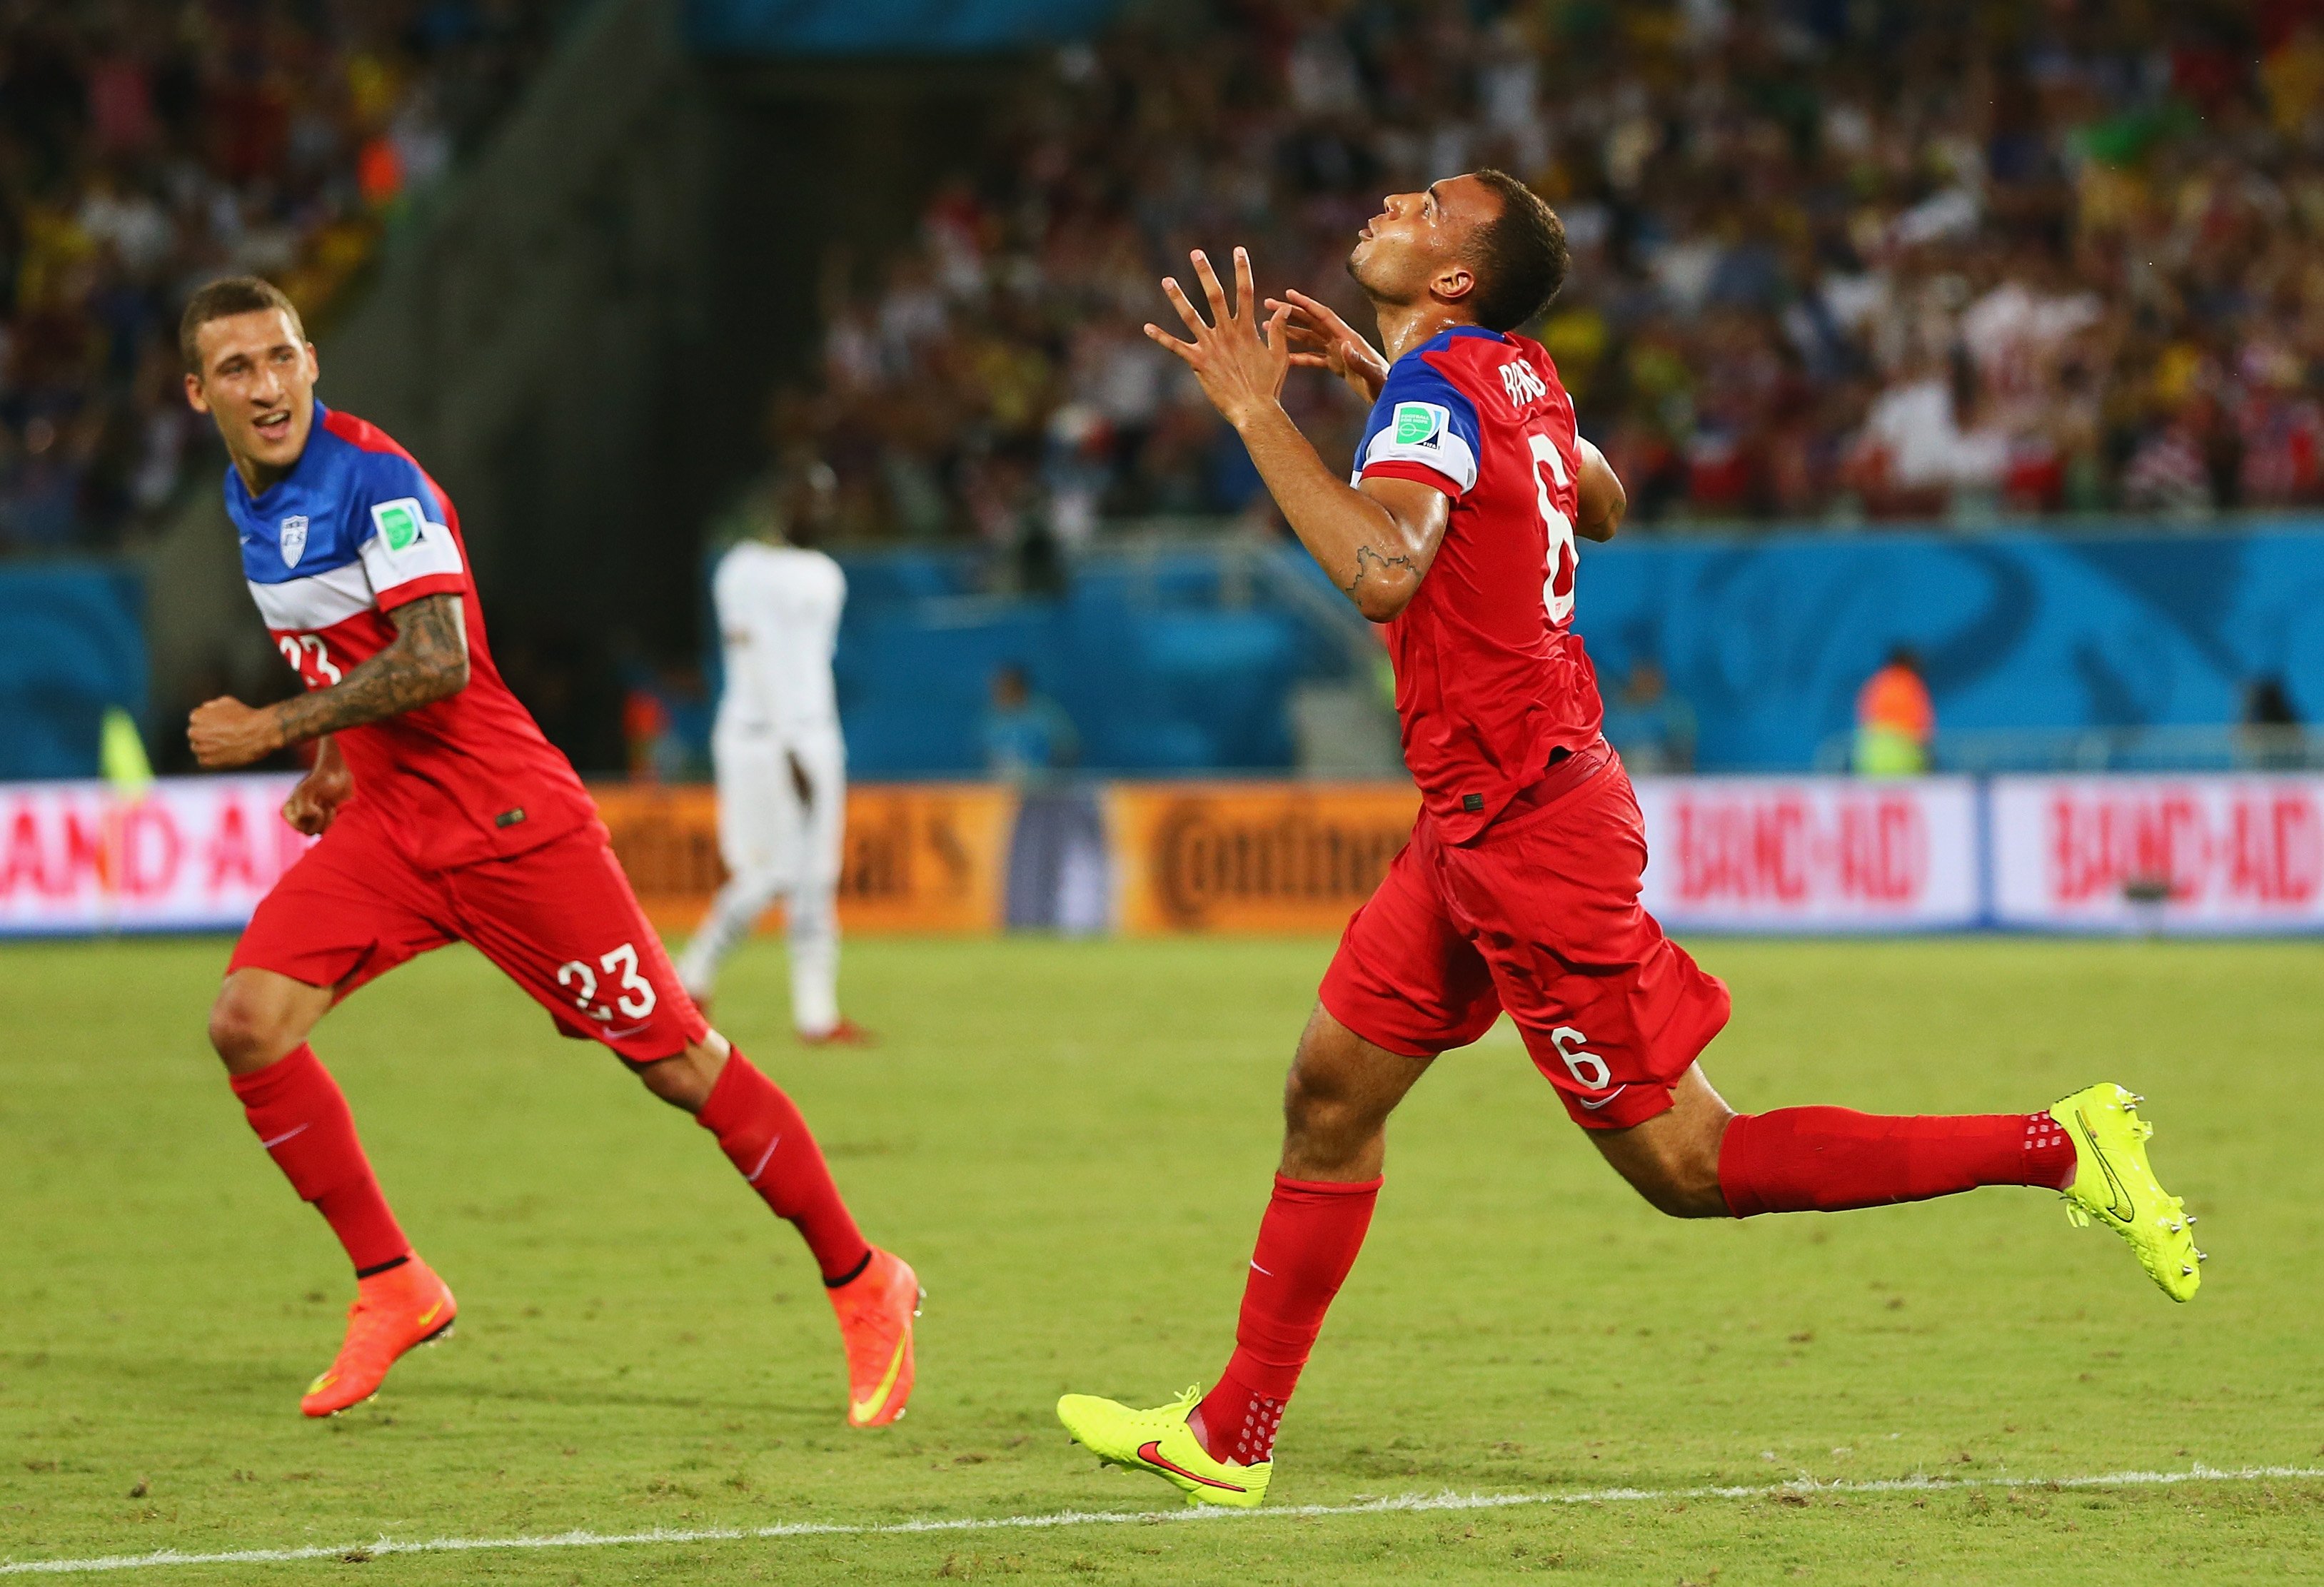 From right: John Brooks of the United States celebrates scoring his team's second goal with Fabian Johnson during the 2014 FIFA World Cup Brazil Group G match between Ghana and the United States at Estadio das Dunas on June 16, 2014 in Natal, Brazil.